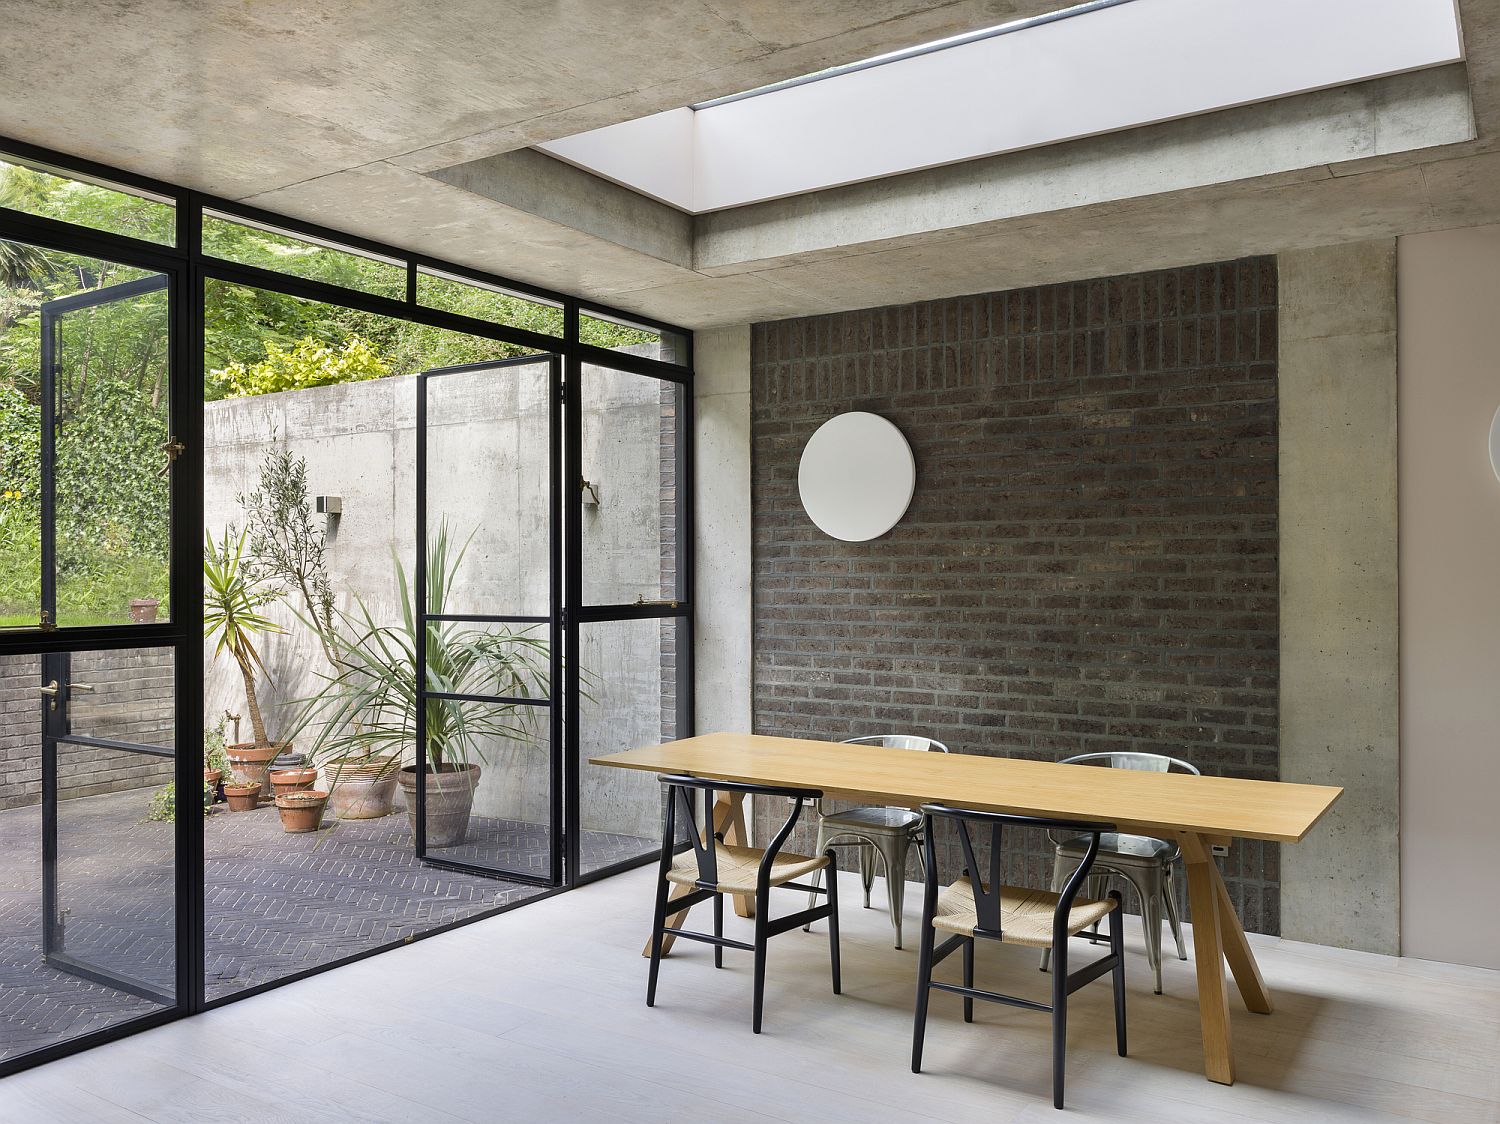 Skylight brings a flood of natural light into the rear extension dining space